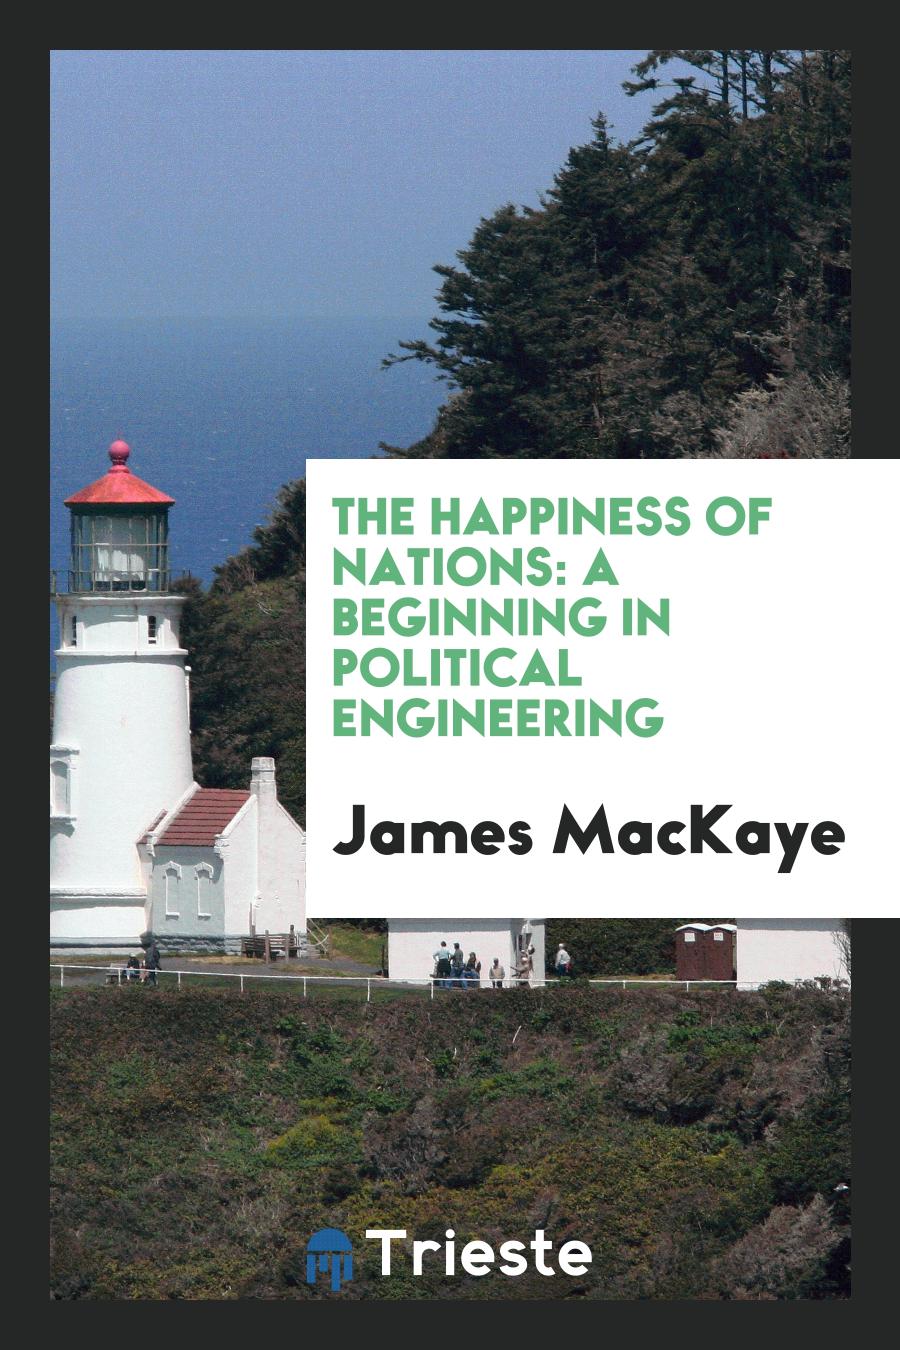 The Happiness of Nations: A Beginning in Political Engineering